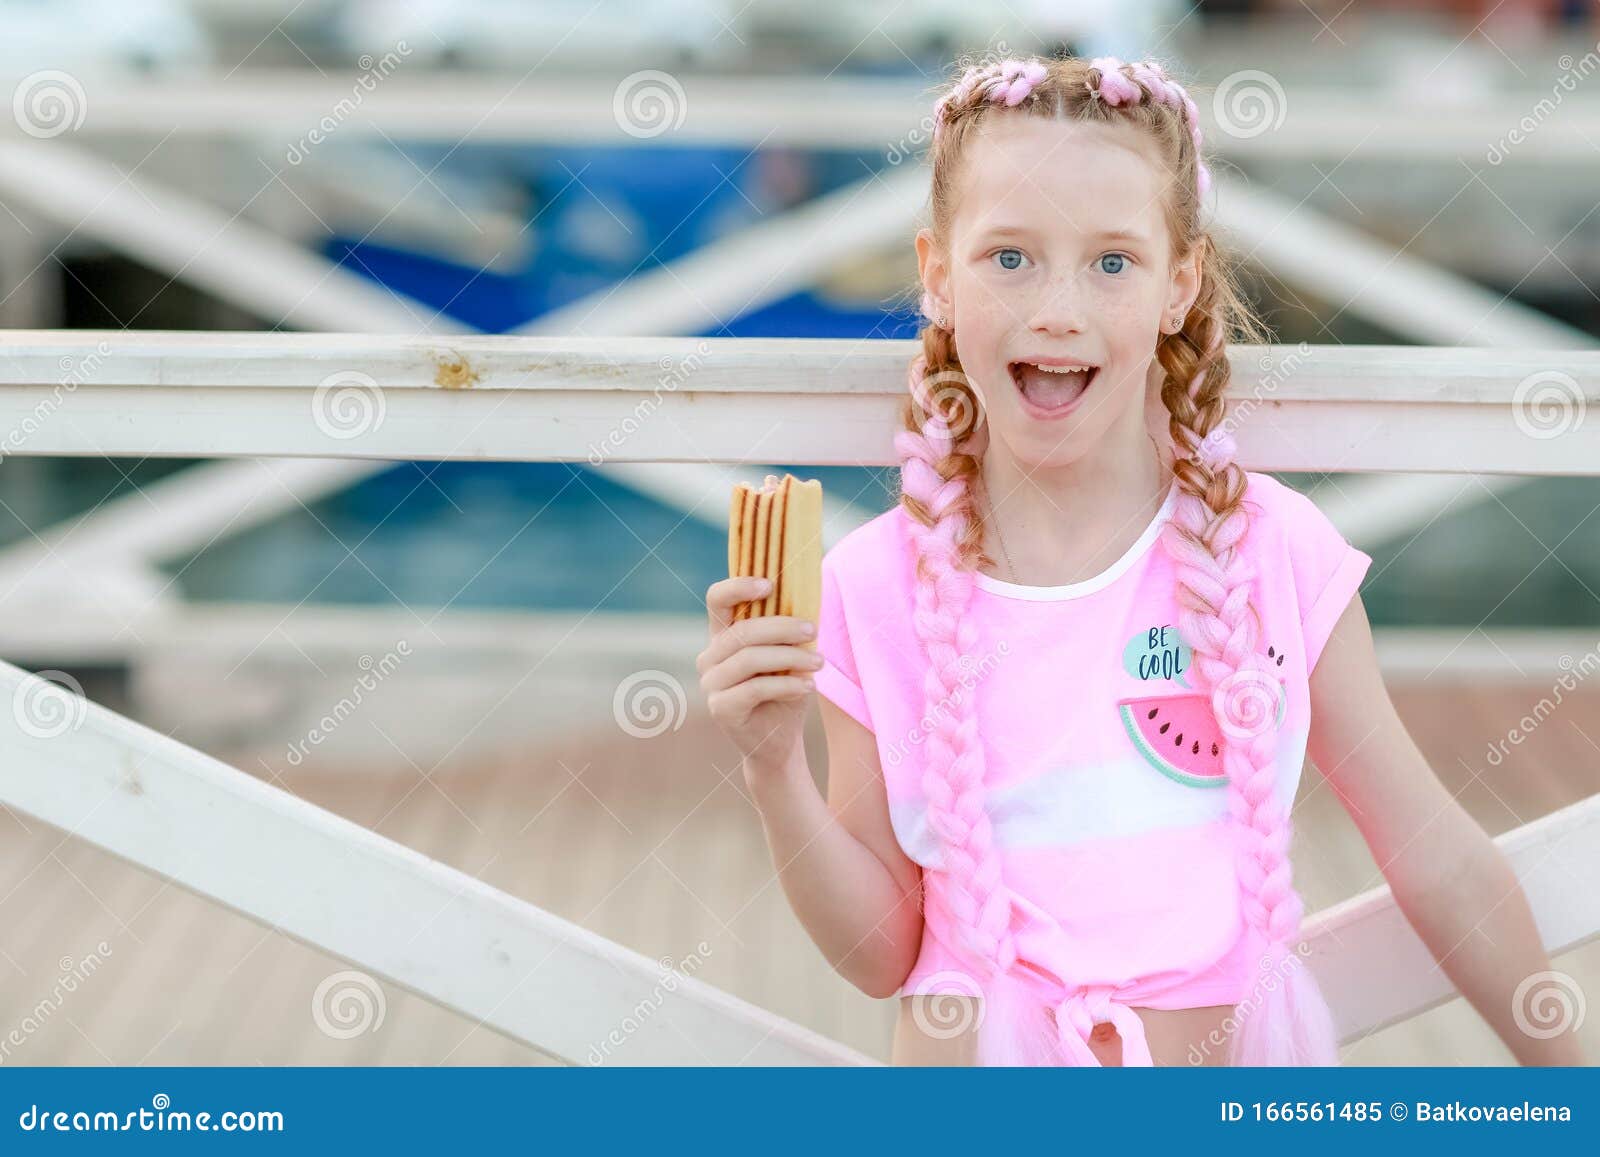 Teen Schoolgirl Girl With Pigtails Close Up Eating Ice Cream In Summer